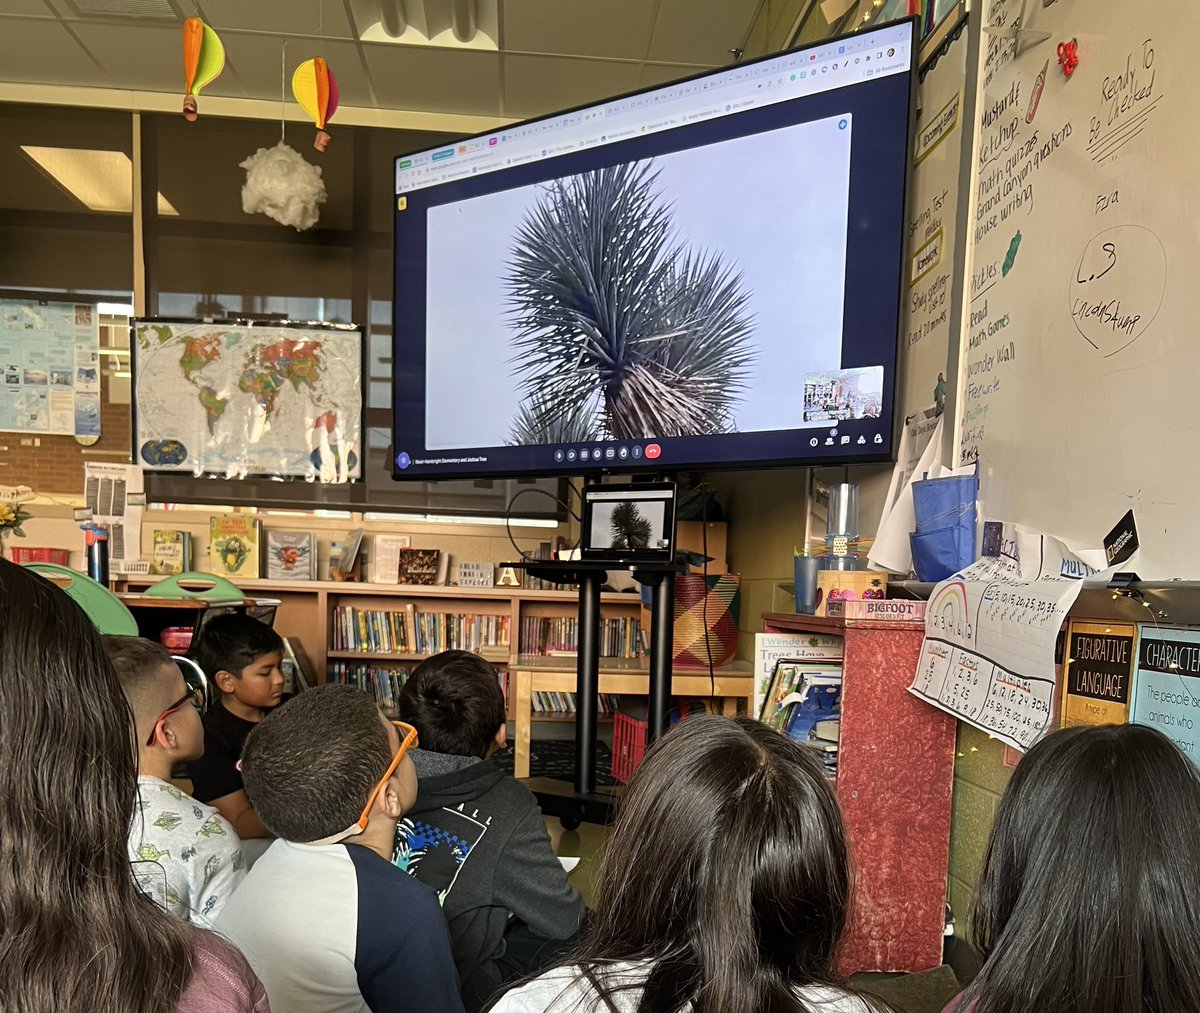 We’ve had an amazing #Skypeathon ! We visited an elephant sanctuary & learned about their adaptations, made new friends in Canada via #mysteryskype, and saw Joshua trees and cacti up close as we toured Joshua Tree NP with a park ranger!